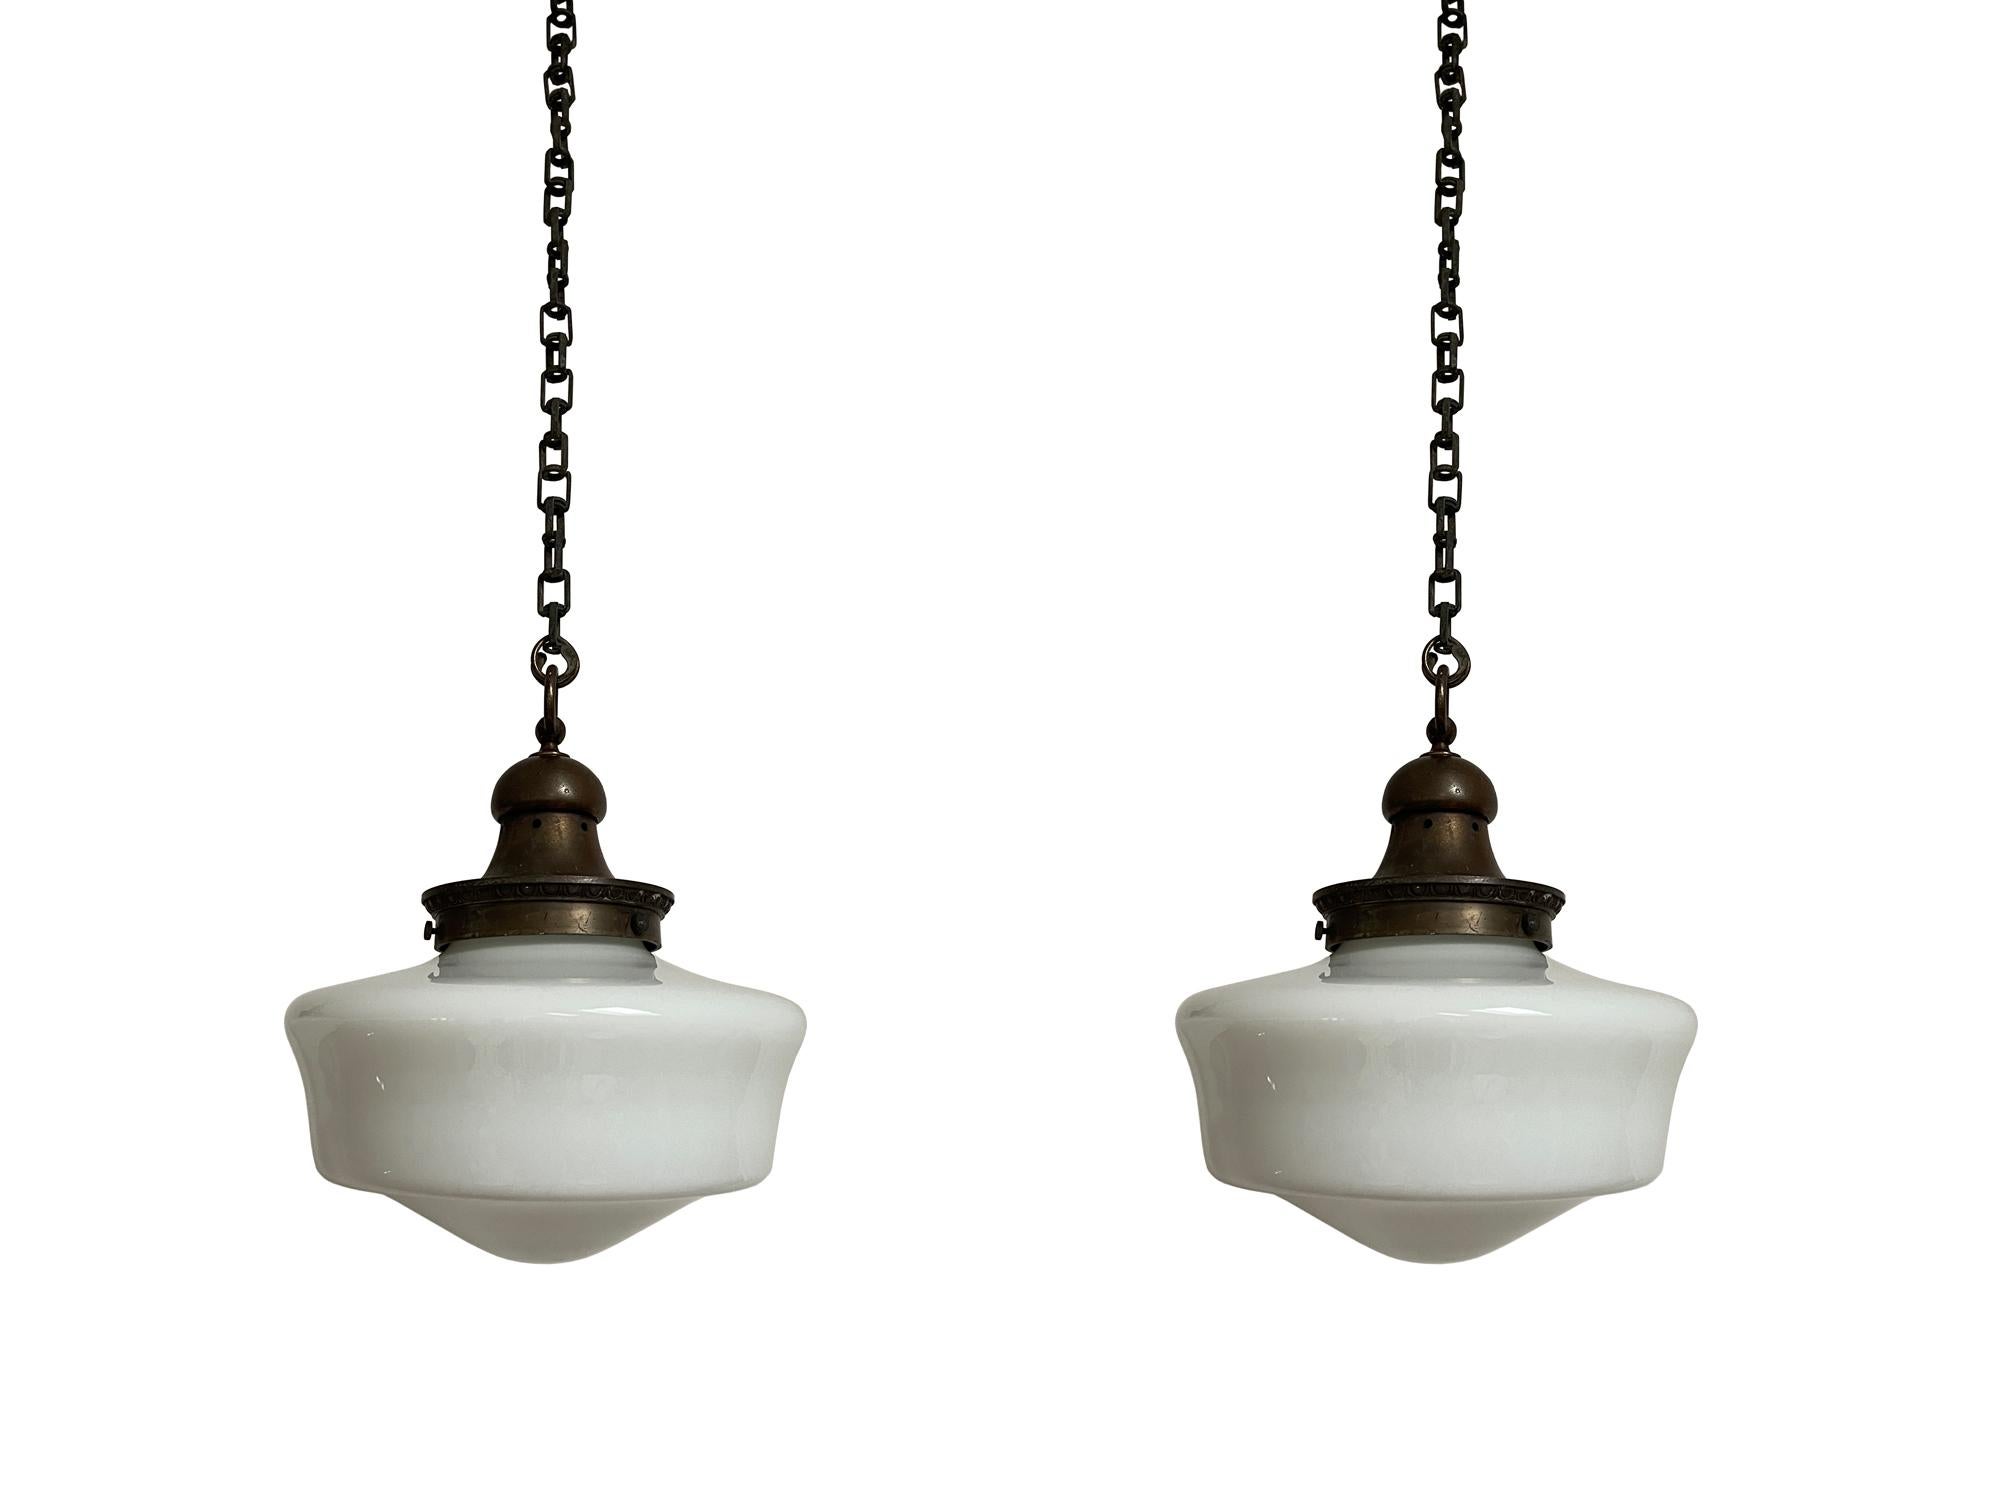 - A beautiful pair of church opaline pendant lights with heavy cast galleries, English circa 1920.
- Wear commensurate with age, all in very good condition, lovely shape to the opaline glass and unusual decorative galleries with bold original